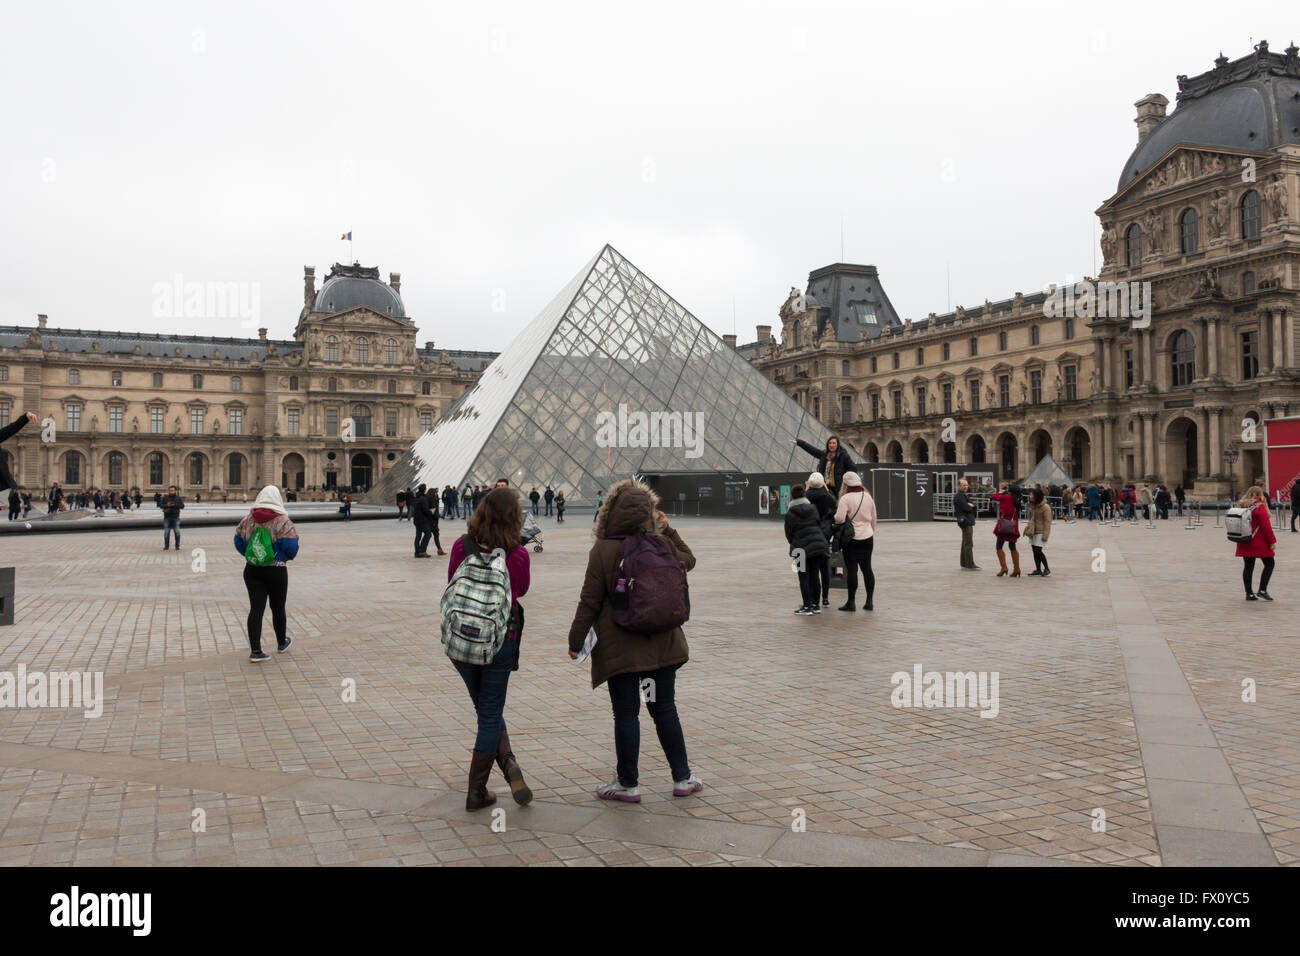 The Louvre Pyramid (Pyramide du Louvre), a large glass and metal pyramid in front of Louvre Museum, Paris, France. Stock Photo